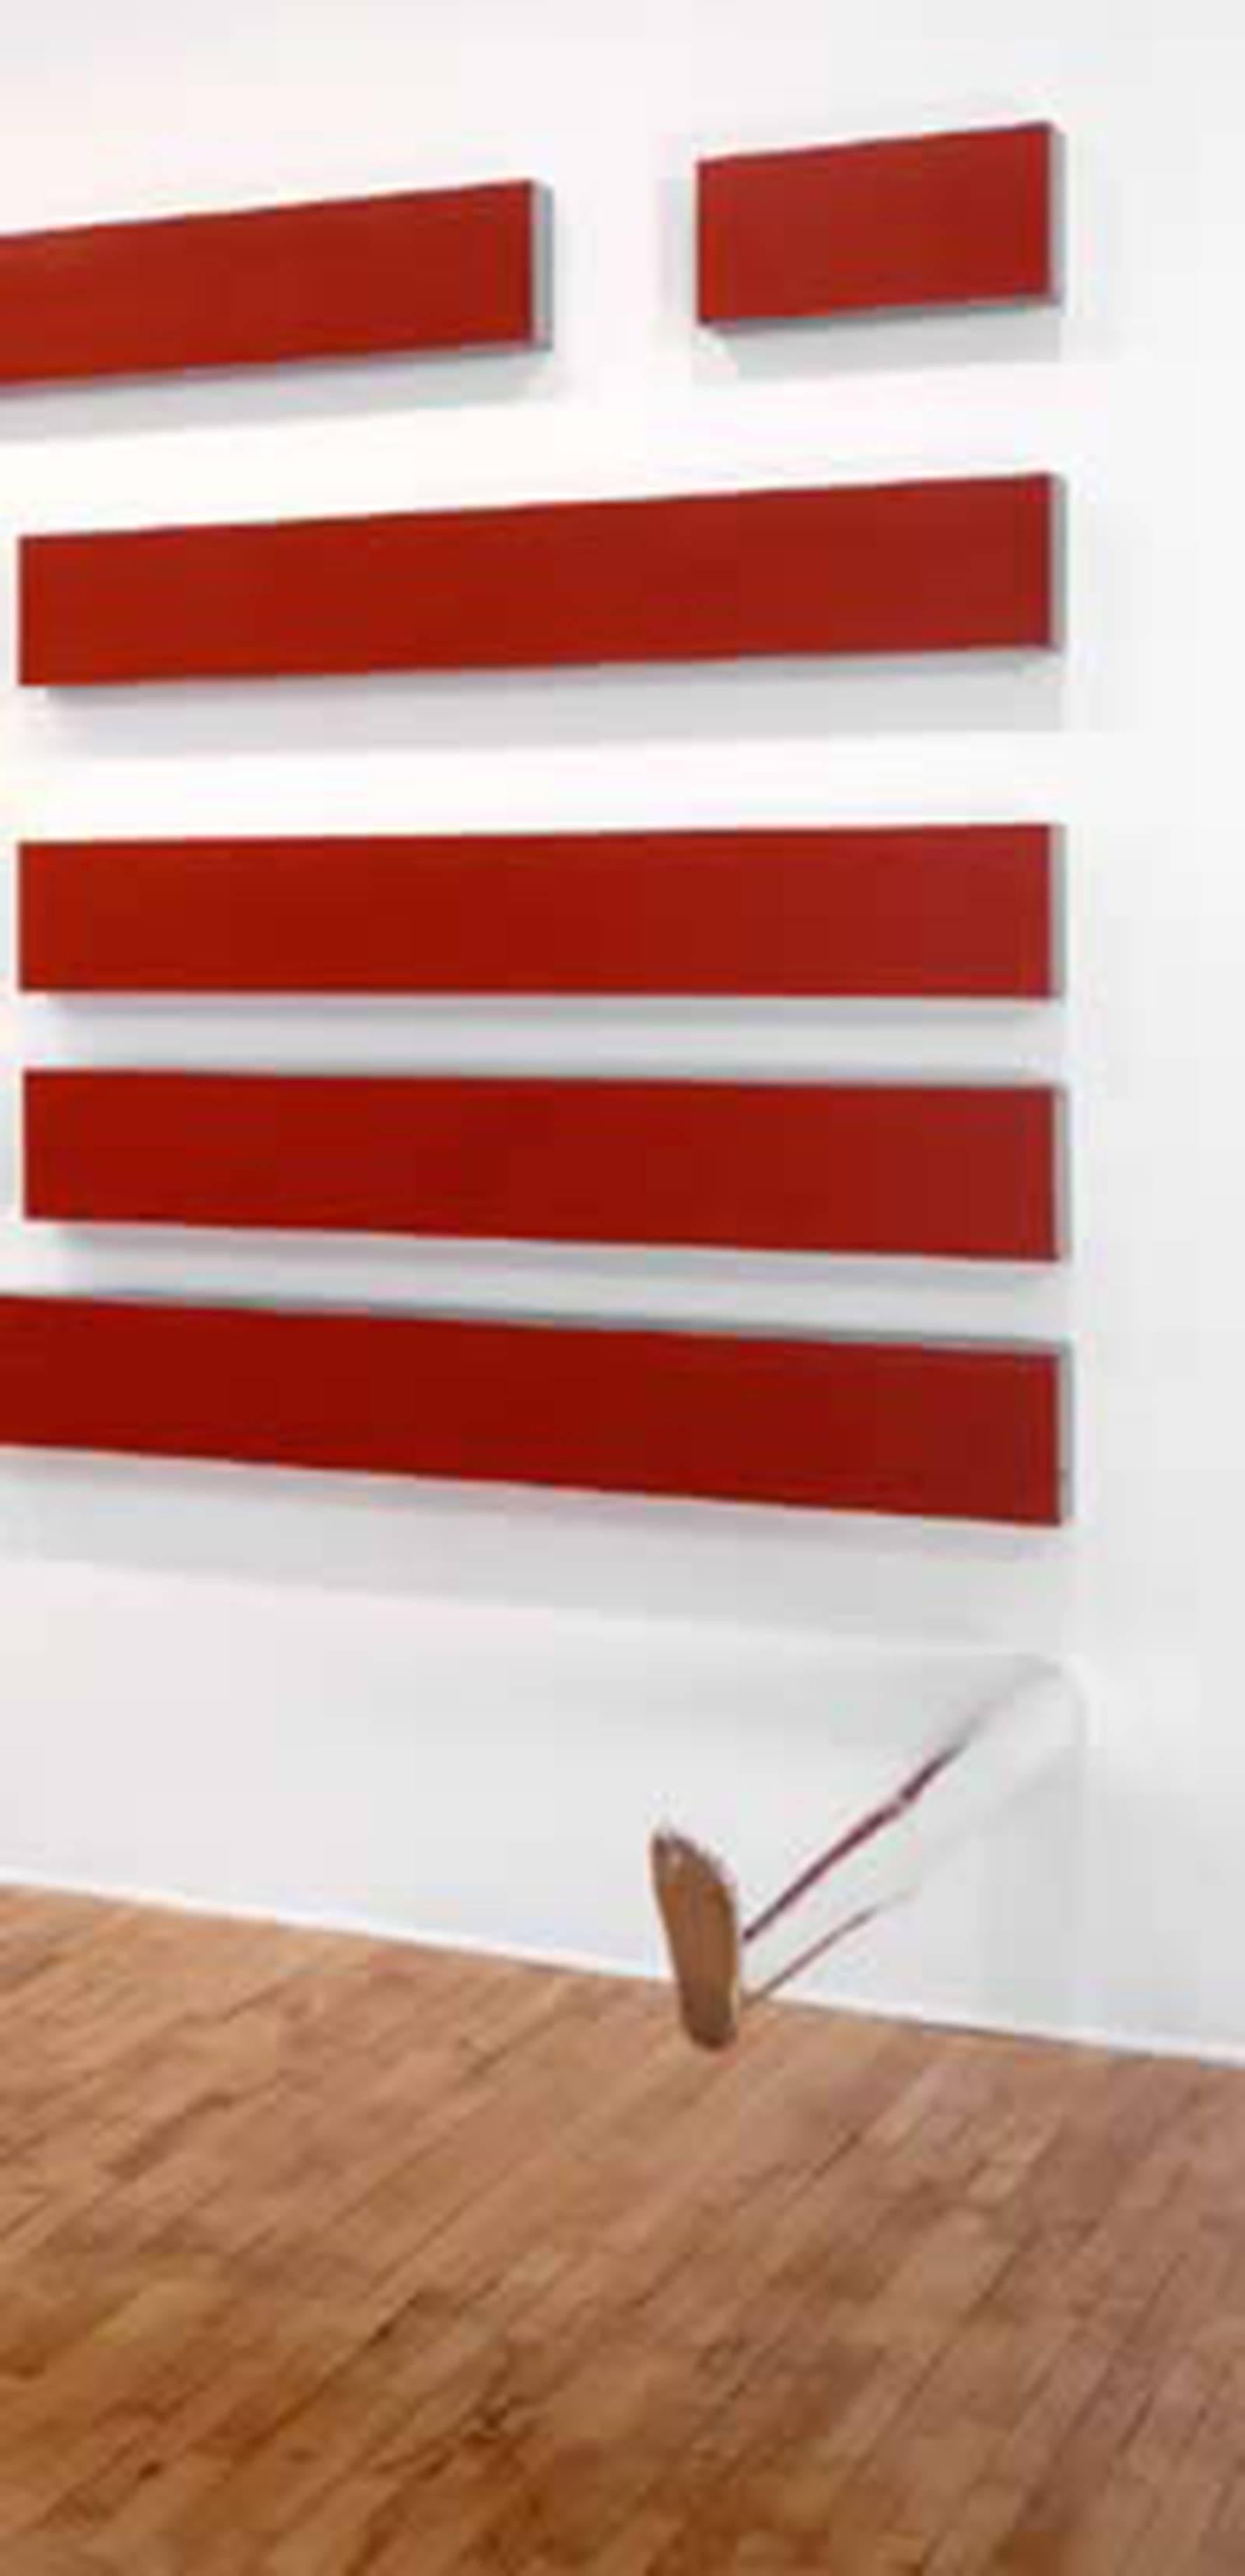 "Senza Titolo"
large red mural with wax elements perpendicular to wall
1995
iron and wax
280 x 608 x 175 cm
